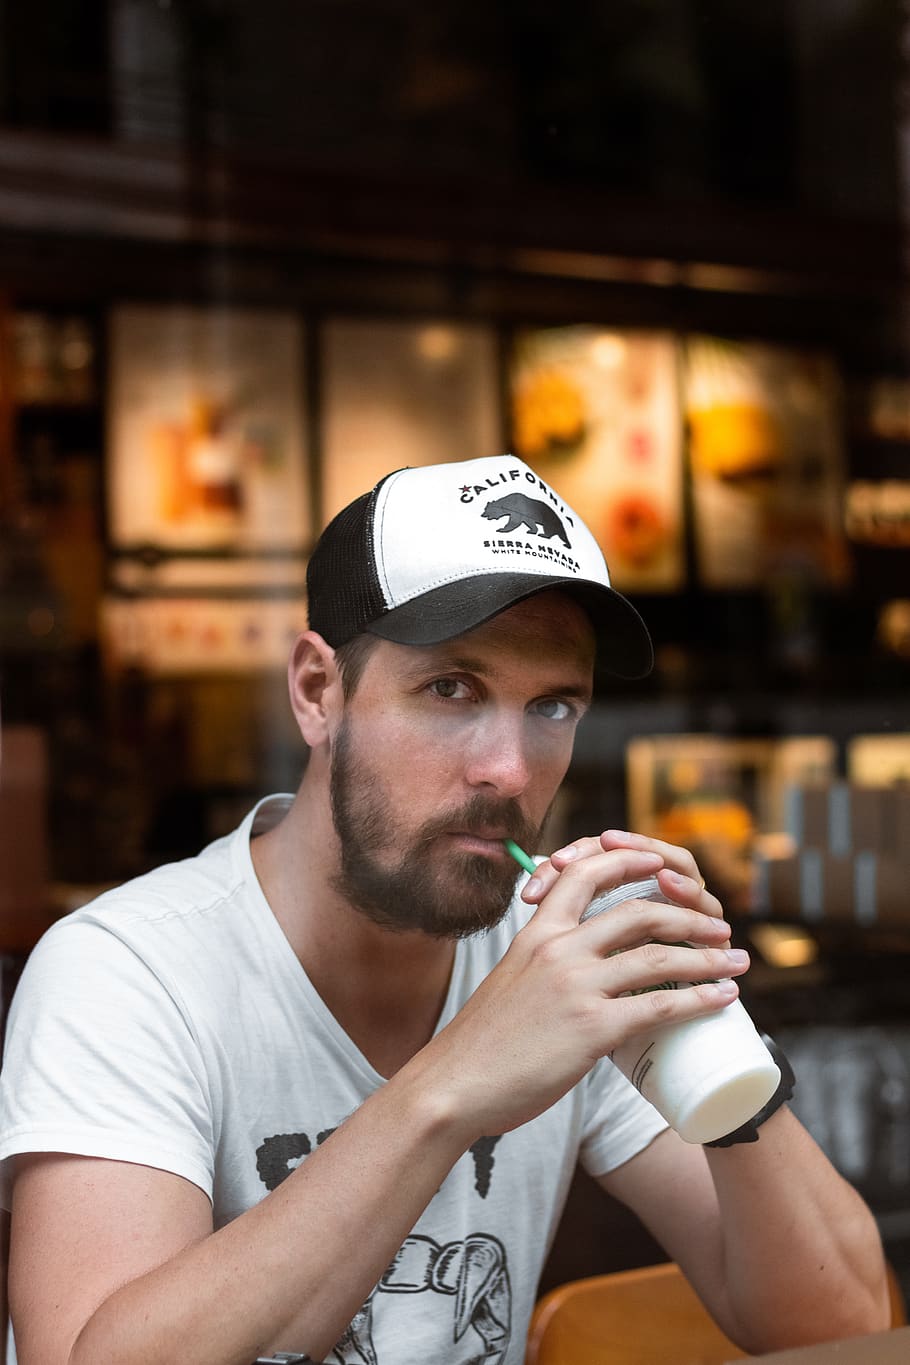 Man Sipping Straw, beverage, blurred background, cap, casual